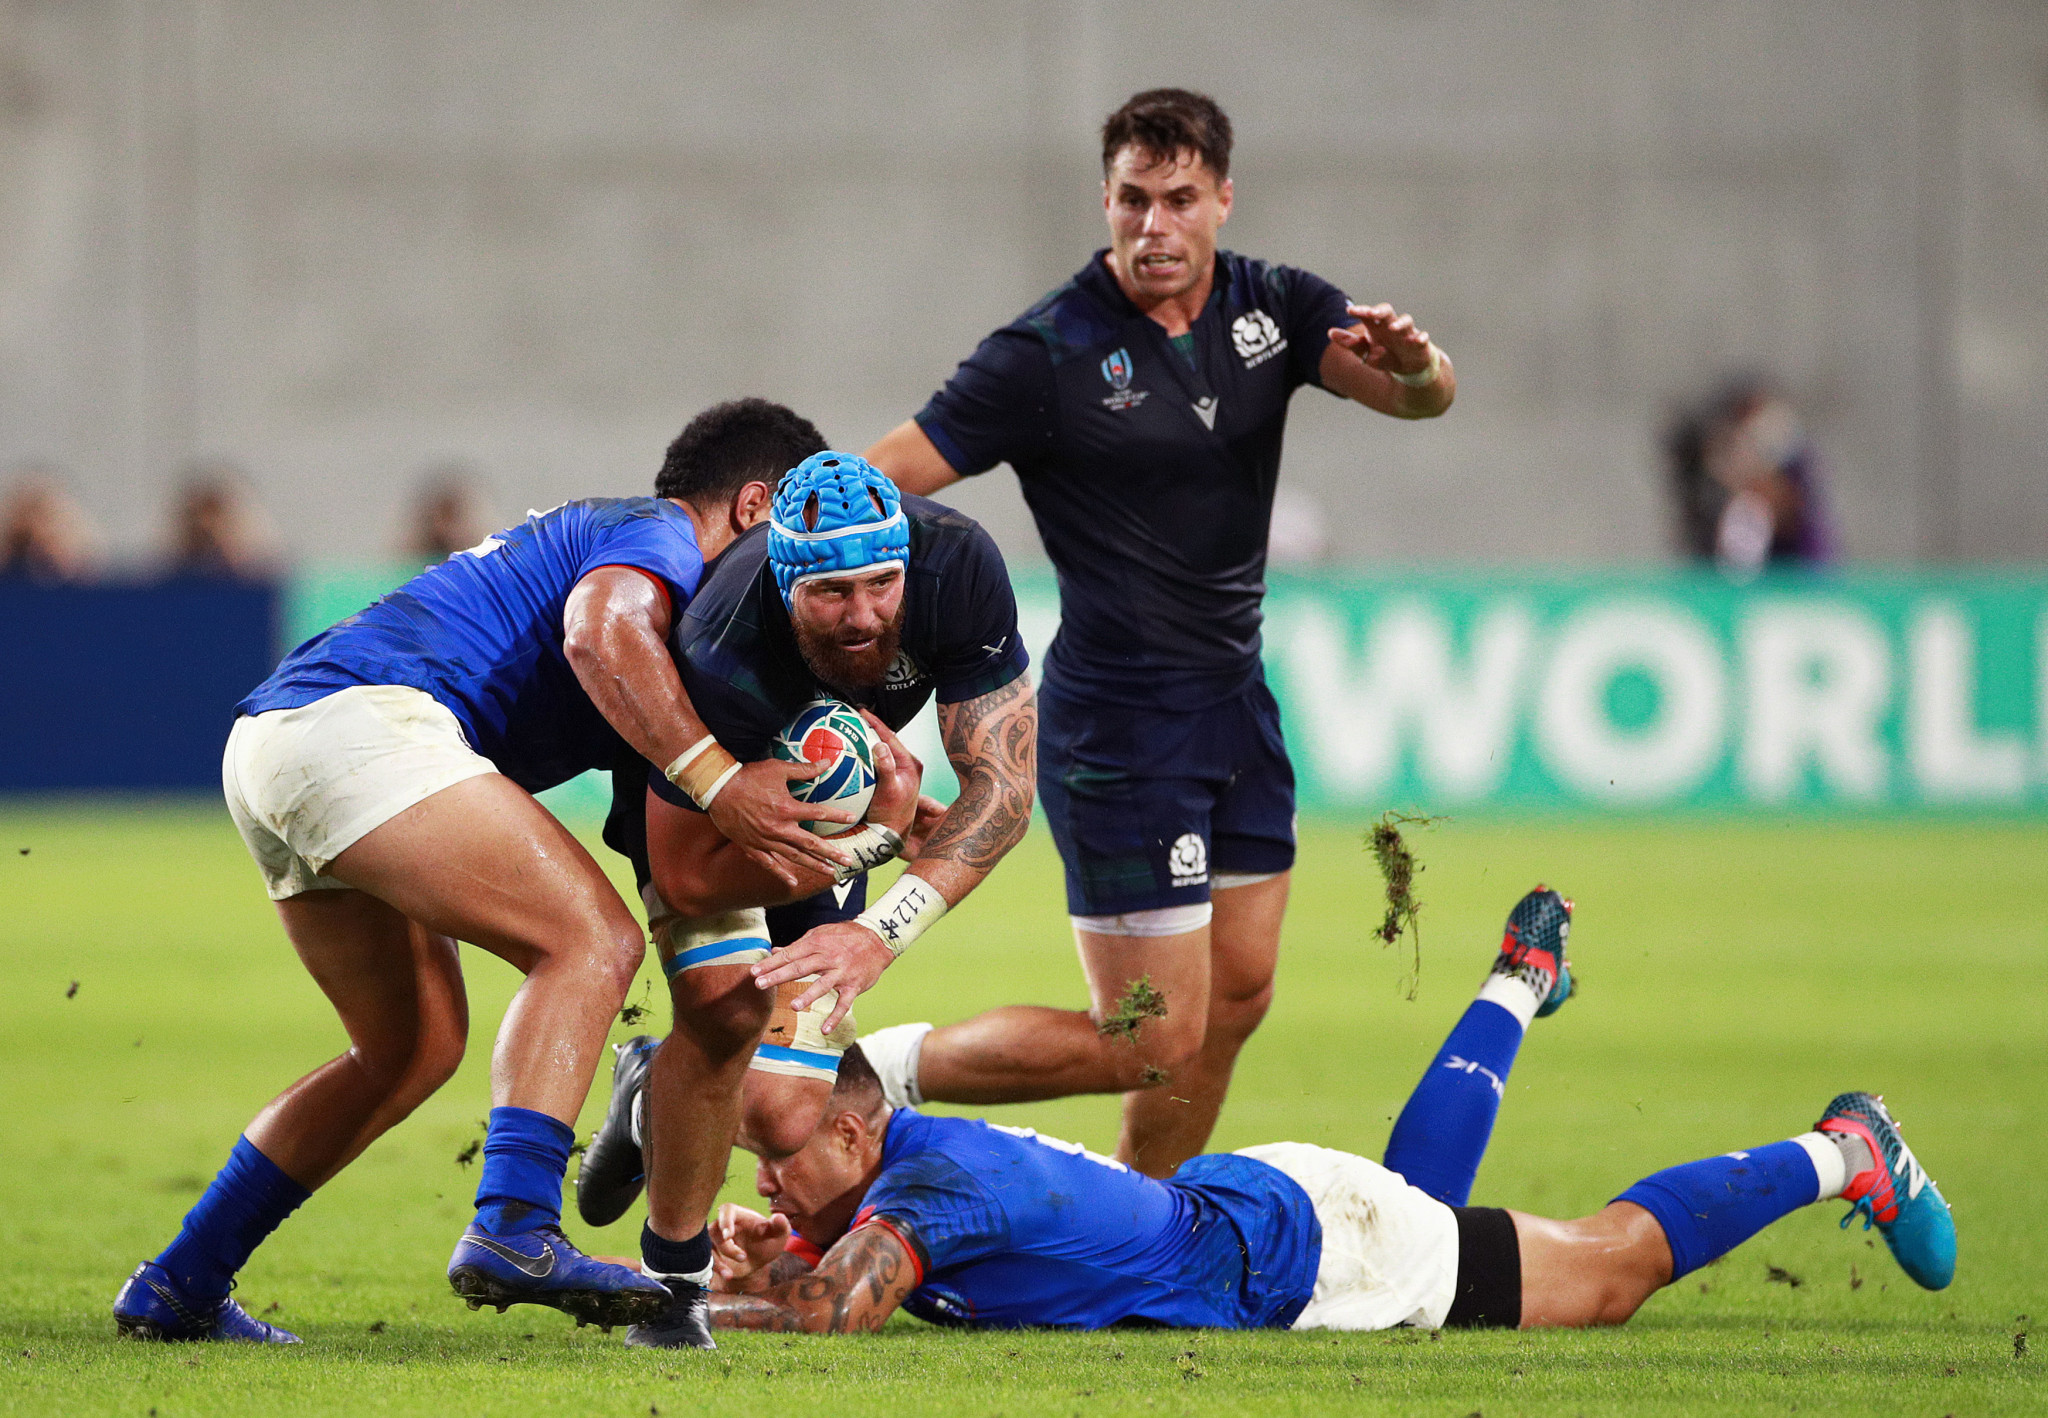 Scotland bounced back from their disappointing defeat to Ireland ©Getty Images